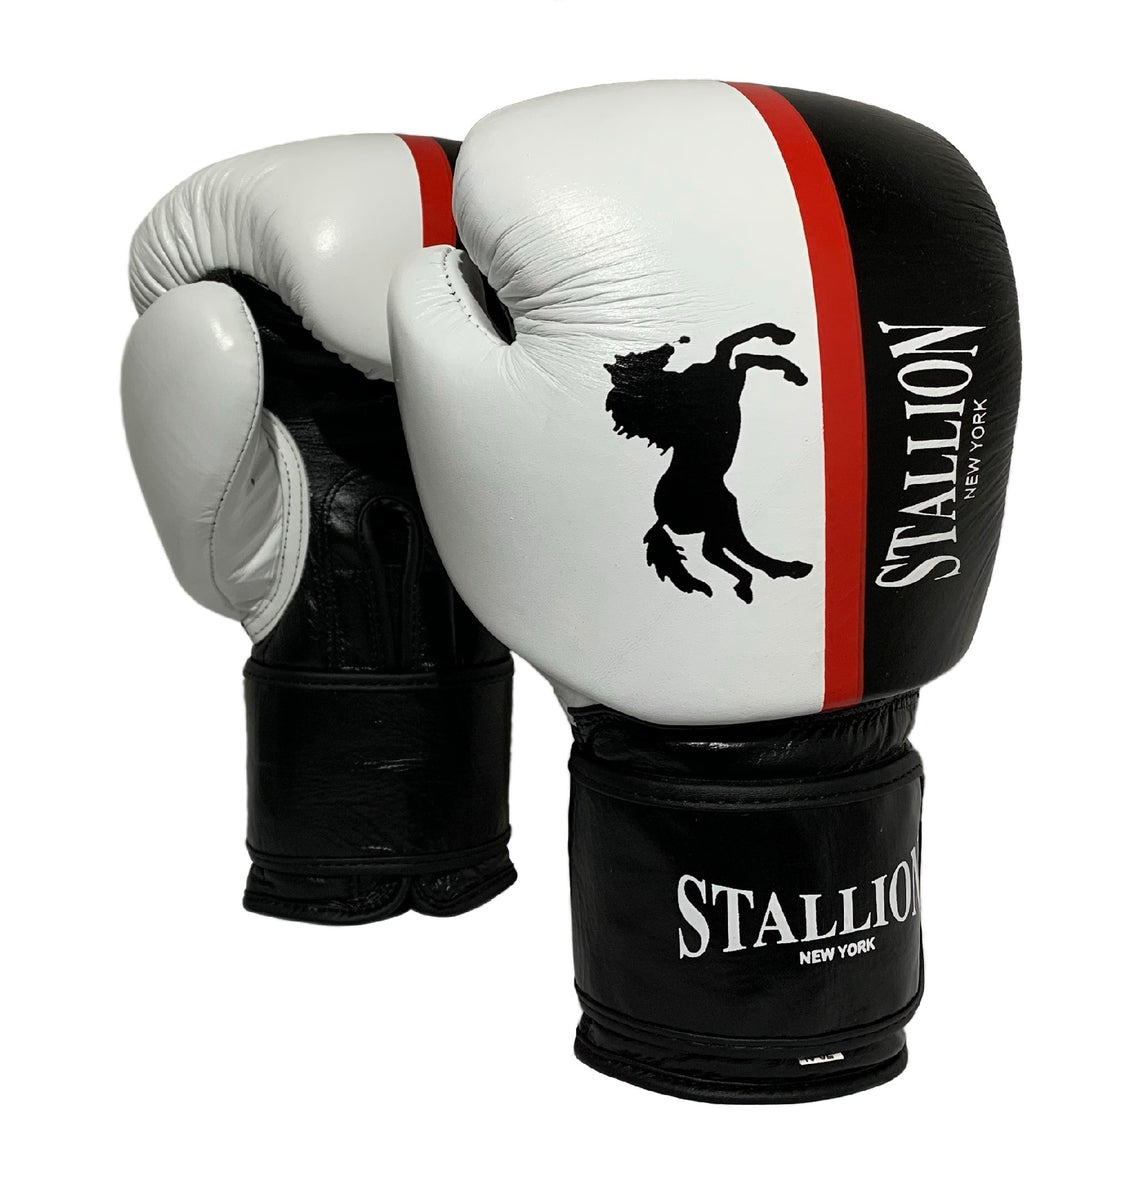 Stallion Boxing Gloves - All Pro Leather